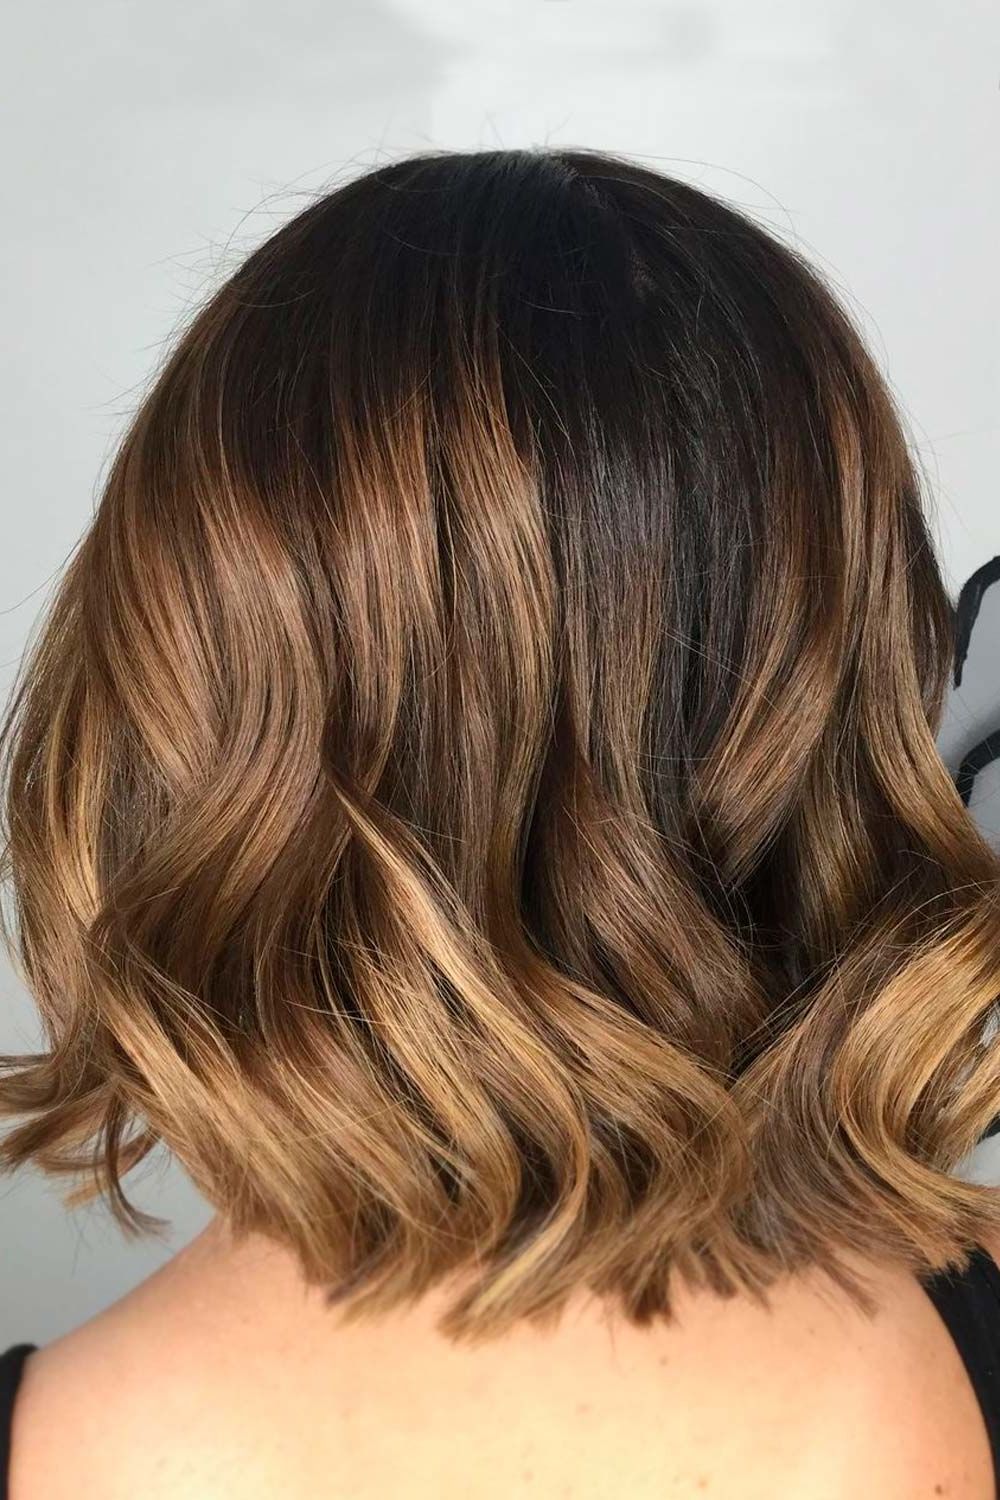 Newest Wavy Lob Haircuts With Caramel Highlights In Untraditional Lob Haircut Ideas To Give A Try (View 12 of 20)